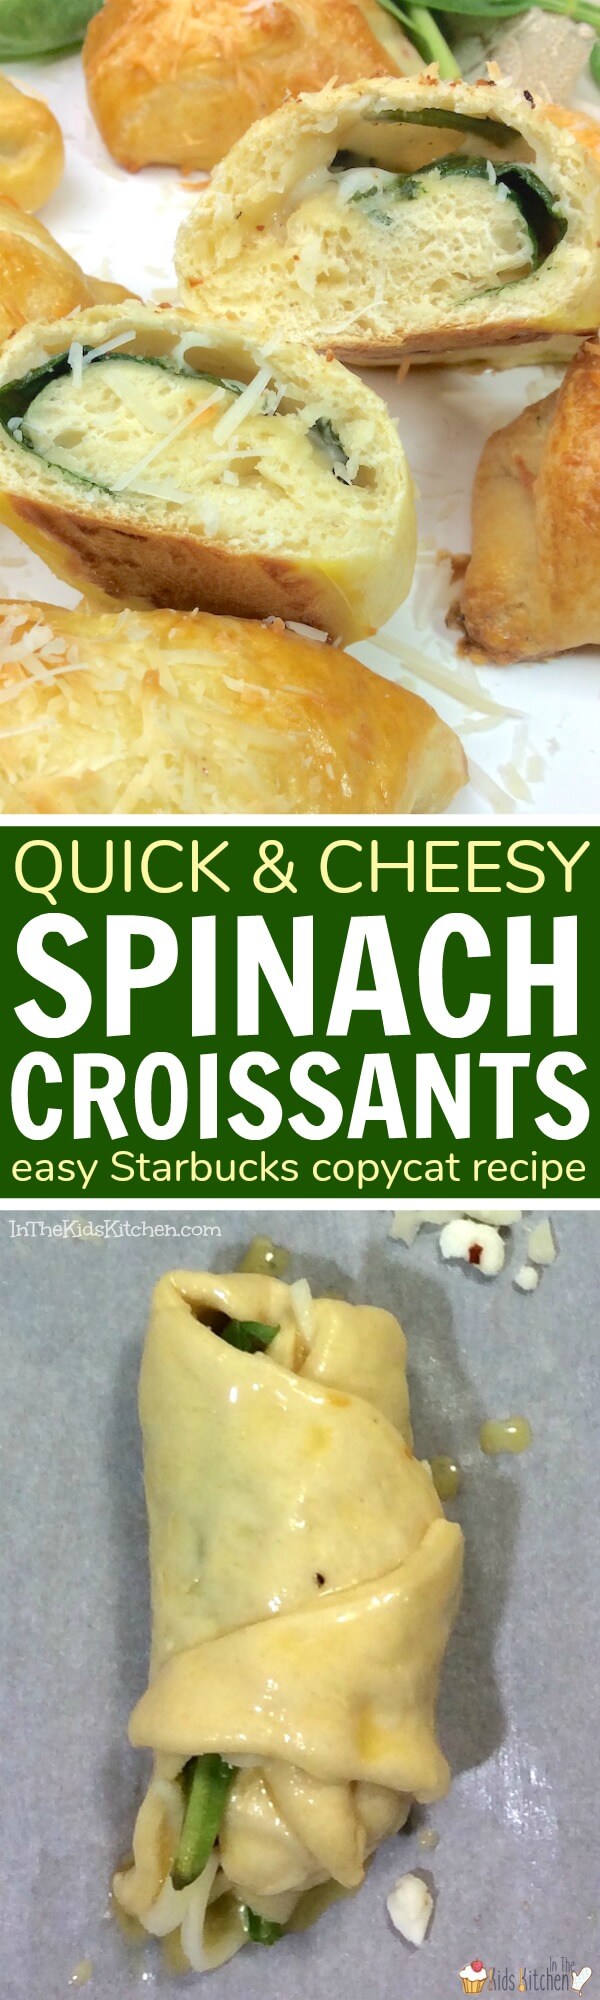 A quick and easy copycat recipe of Starbucks' delicious flaky spinach croissants. Enjoy this savory snack anytime and save money making them at home!